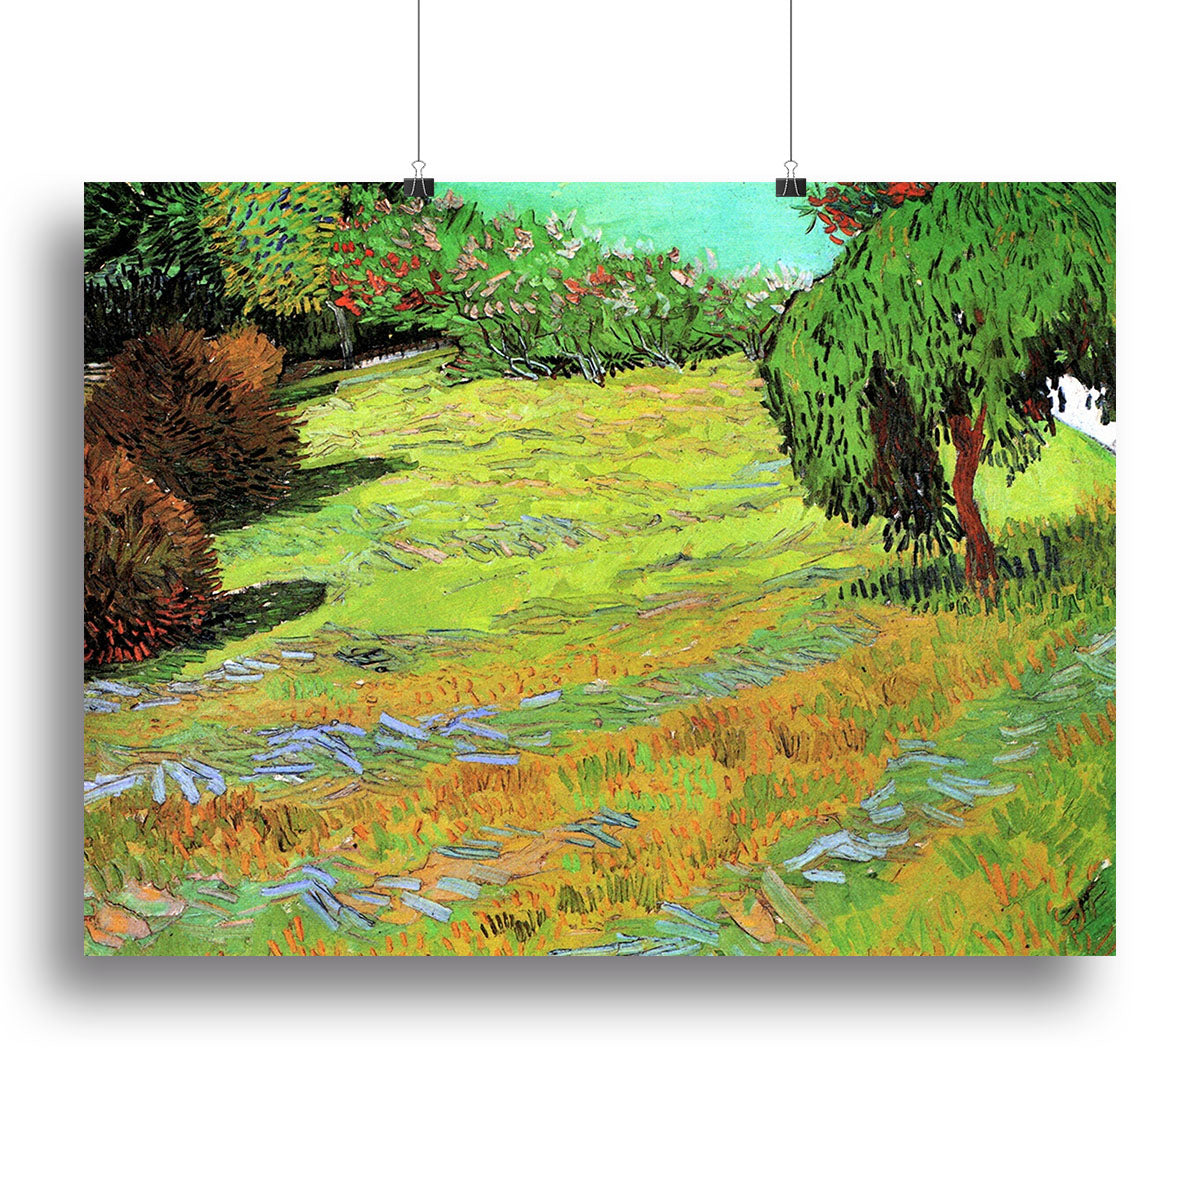 Sunny Lawn in a Public Park by Van Gogh Canvas Print or Poster - Canvas Art Rocks - 2